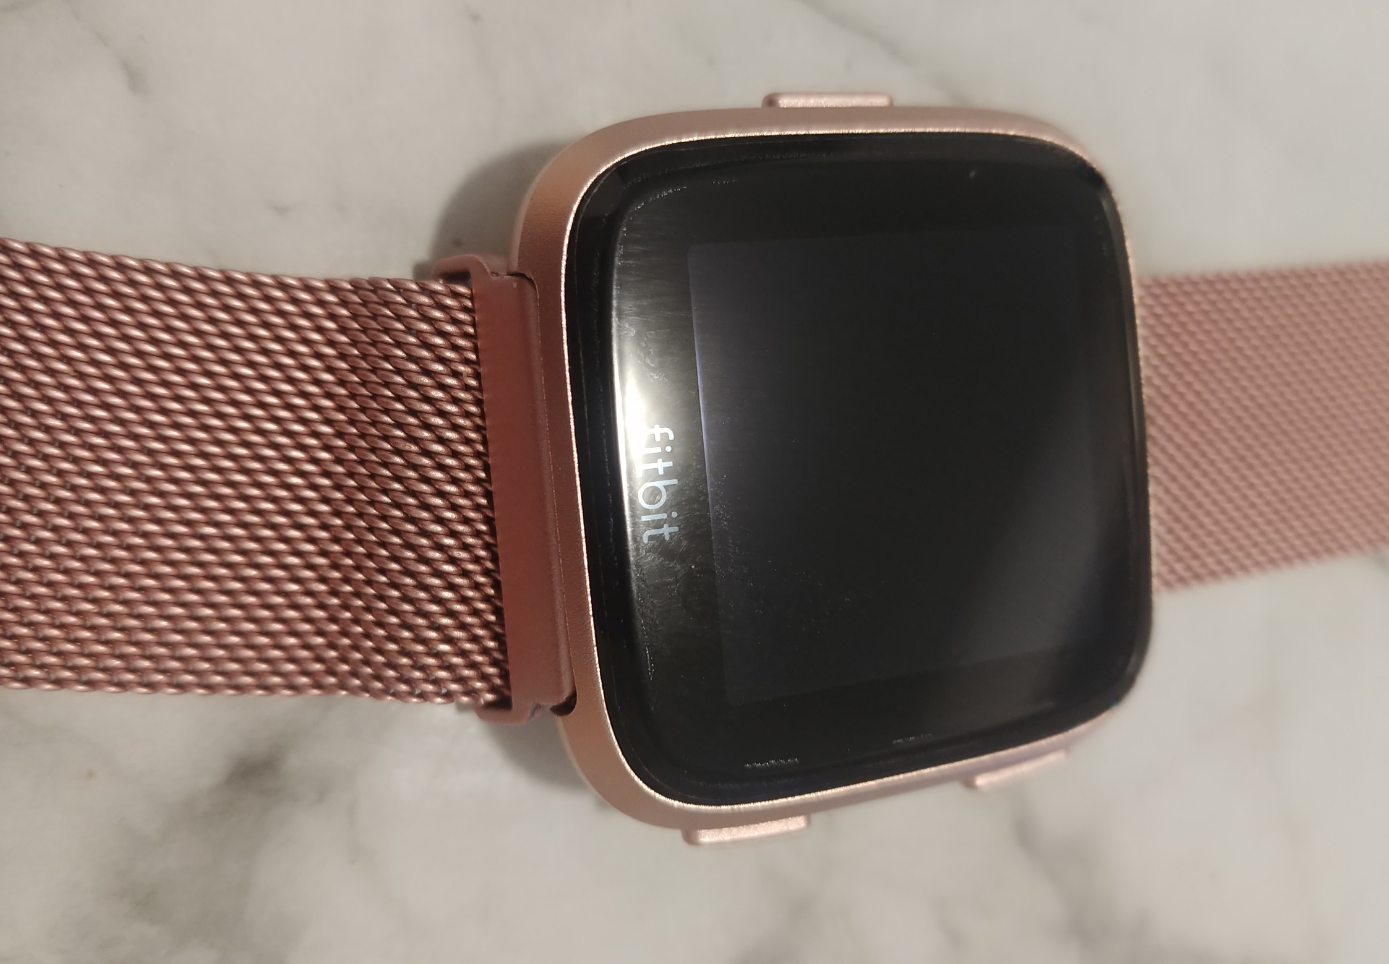 fitbit versa 2 ruby and rose gold